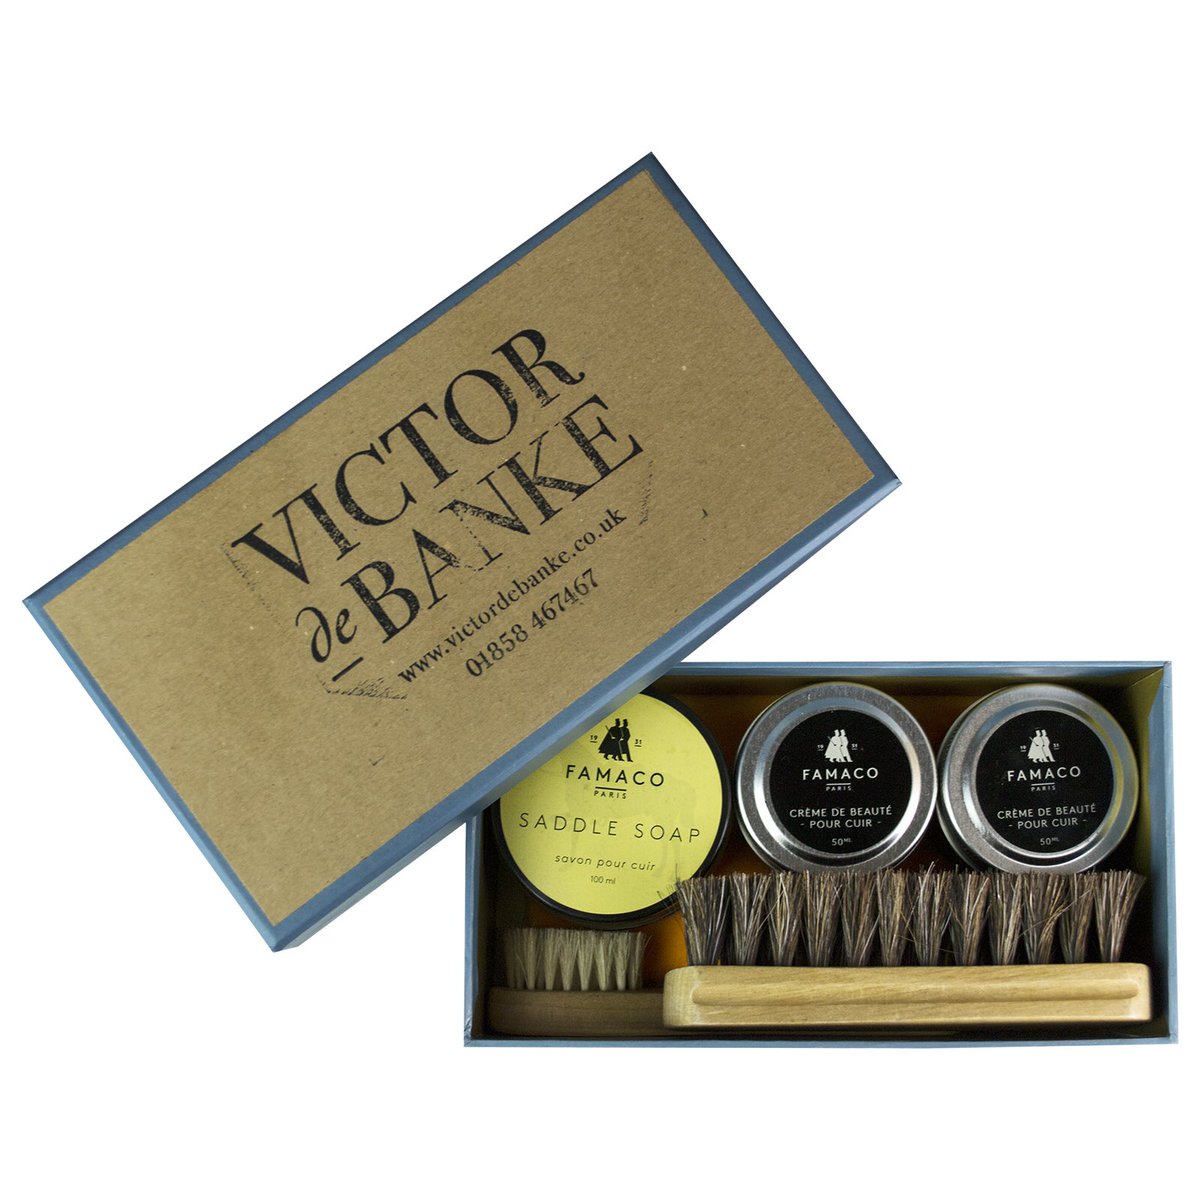 Available now from our website, the new Equestrian Kit, containing #saddlesoap, black and brown cream #polish and application brush and polishing brush and cloth #Horses #pony #riding #clean #tack #countryside #countrylife